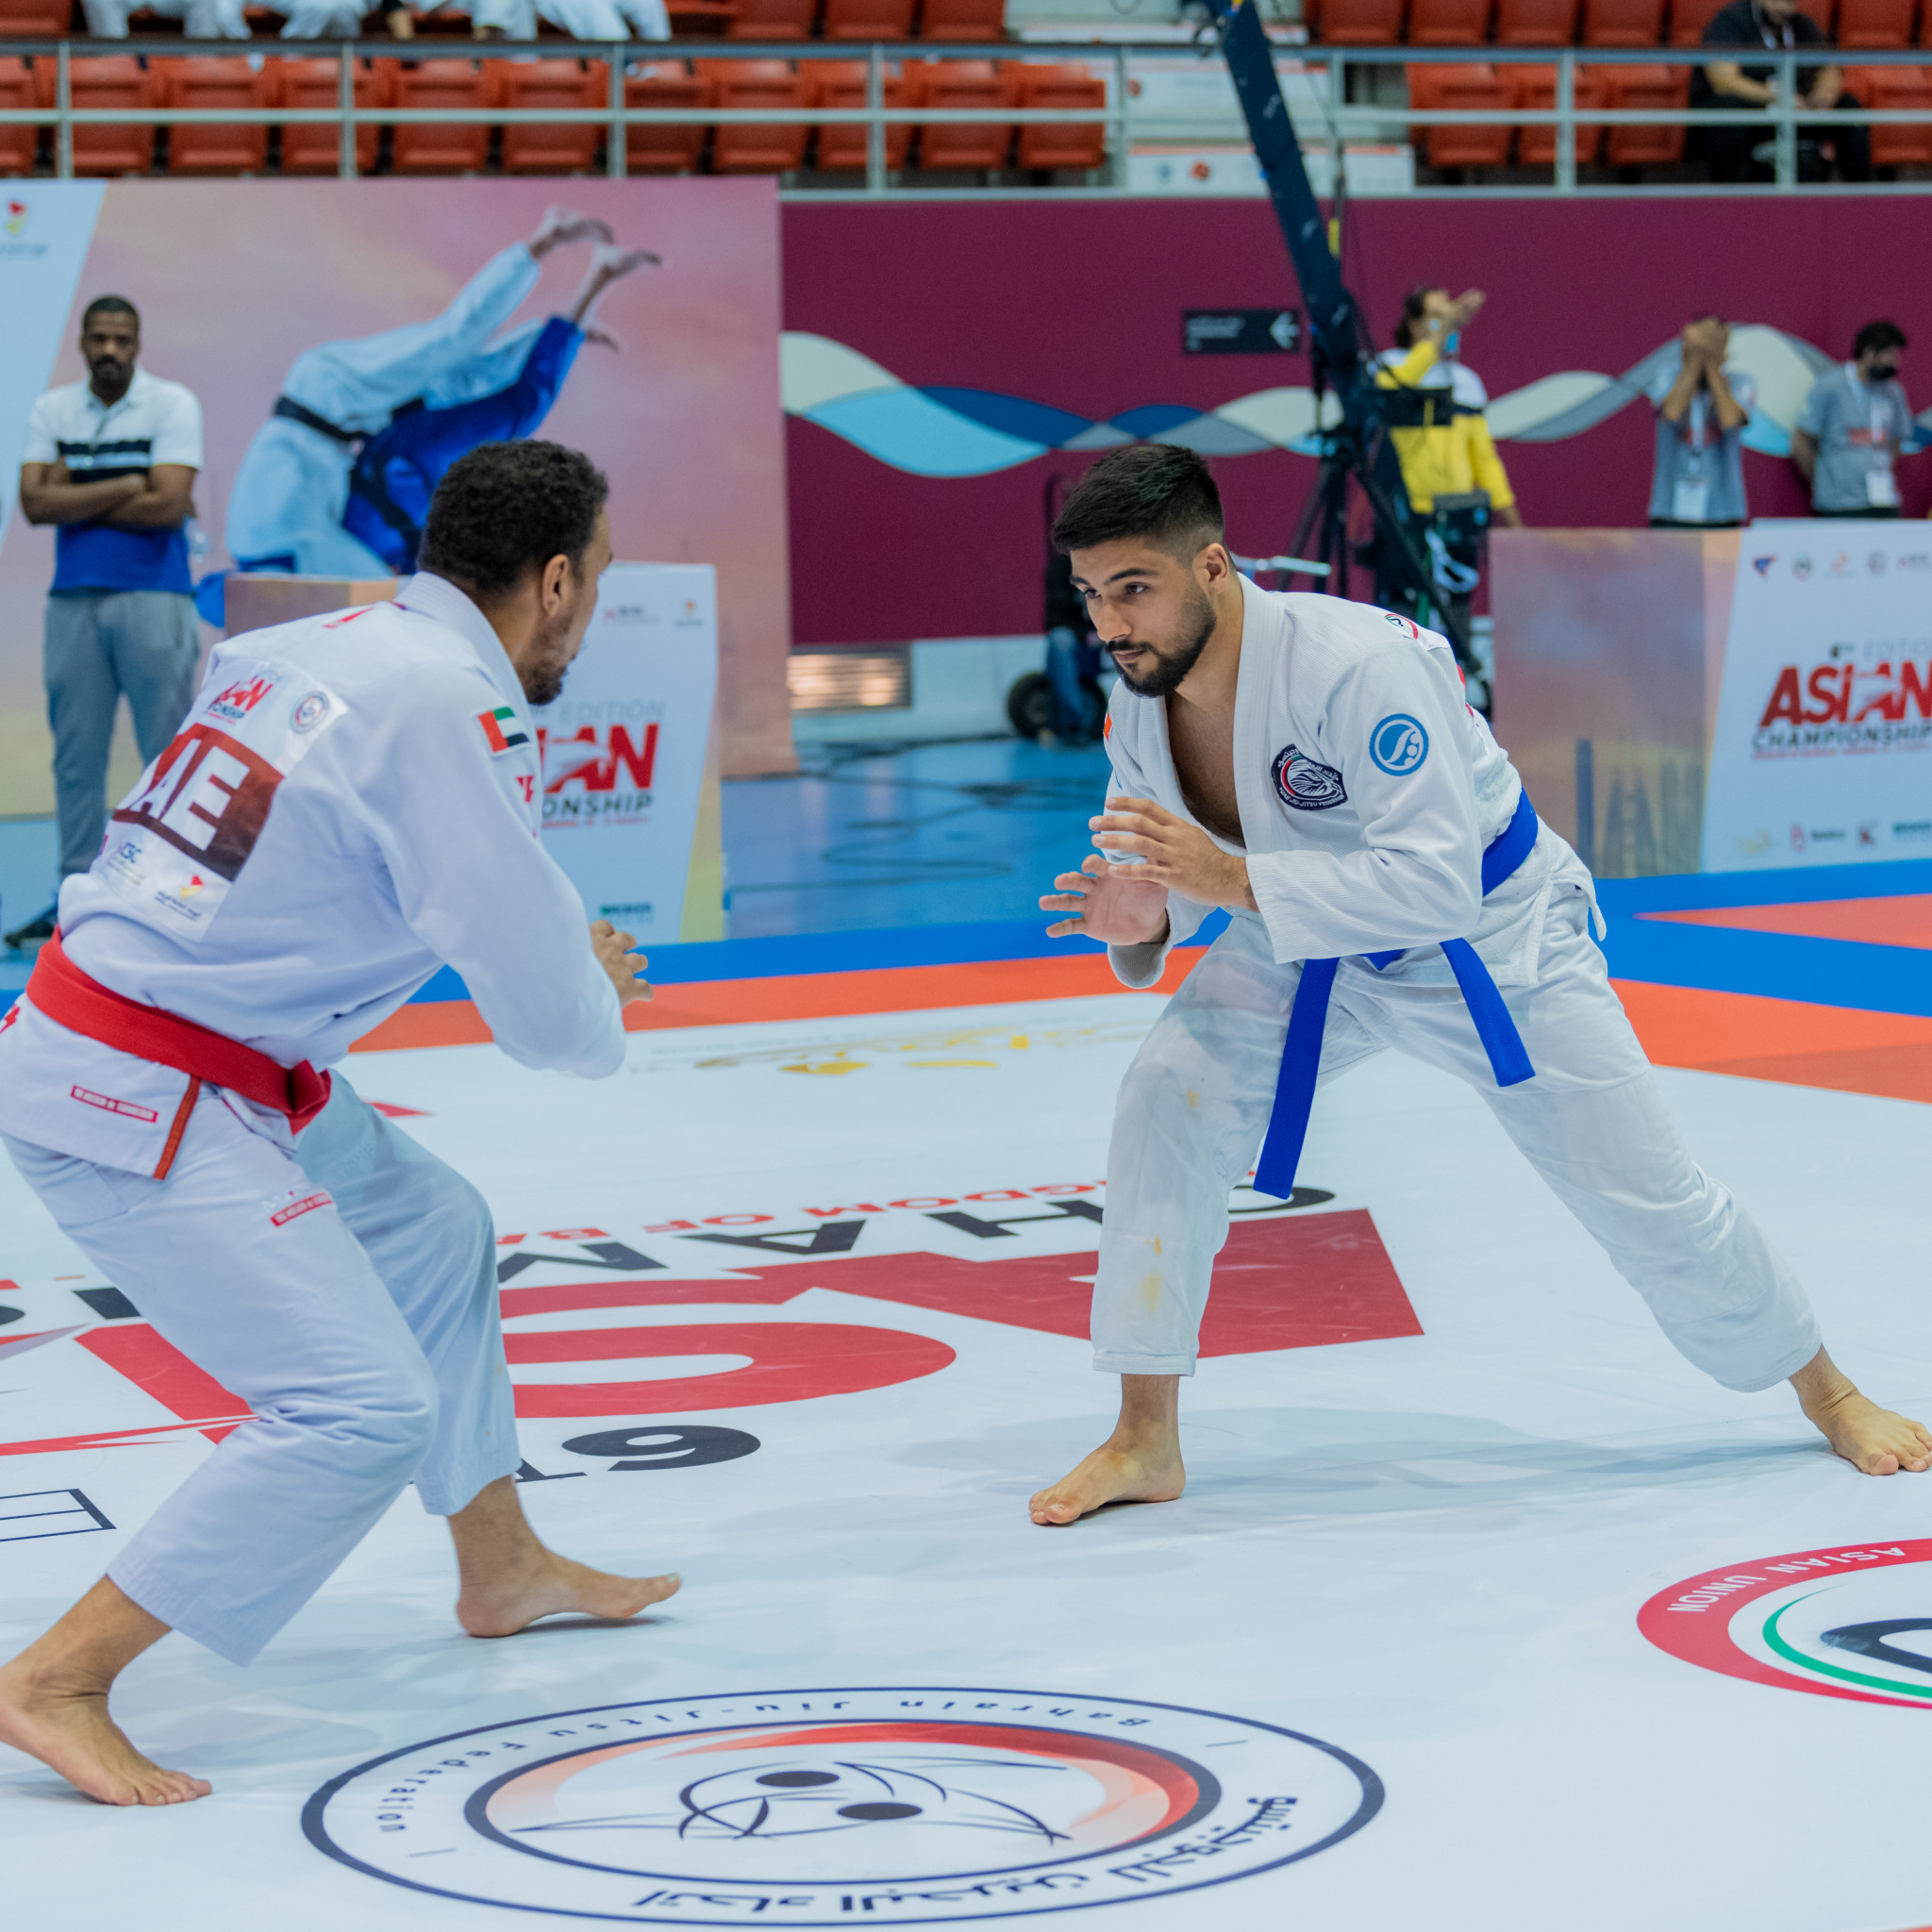 UAE, left, won five of the seven gold medals on day one of the Asian Jiu Jitsu Championships ©JJAU